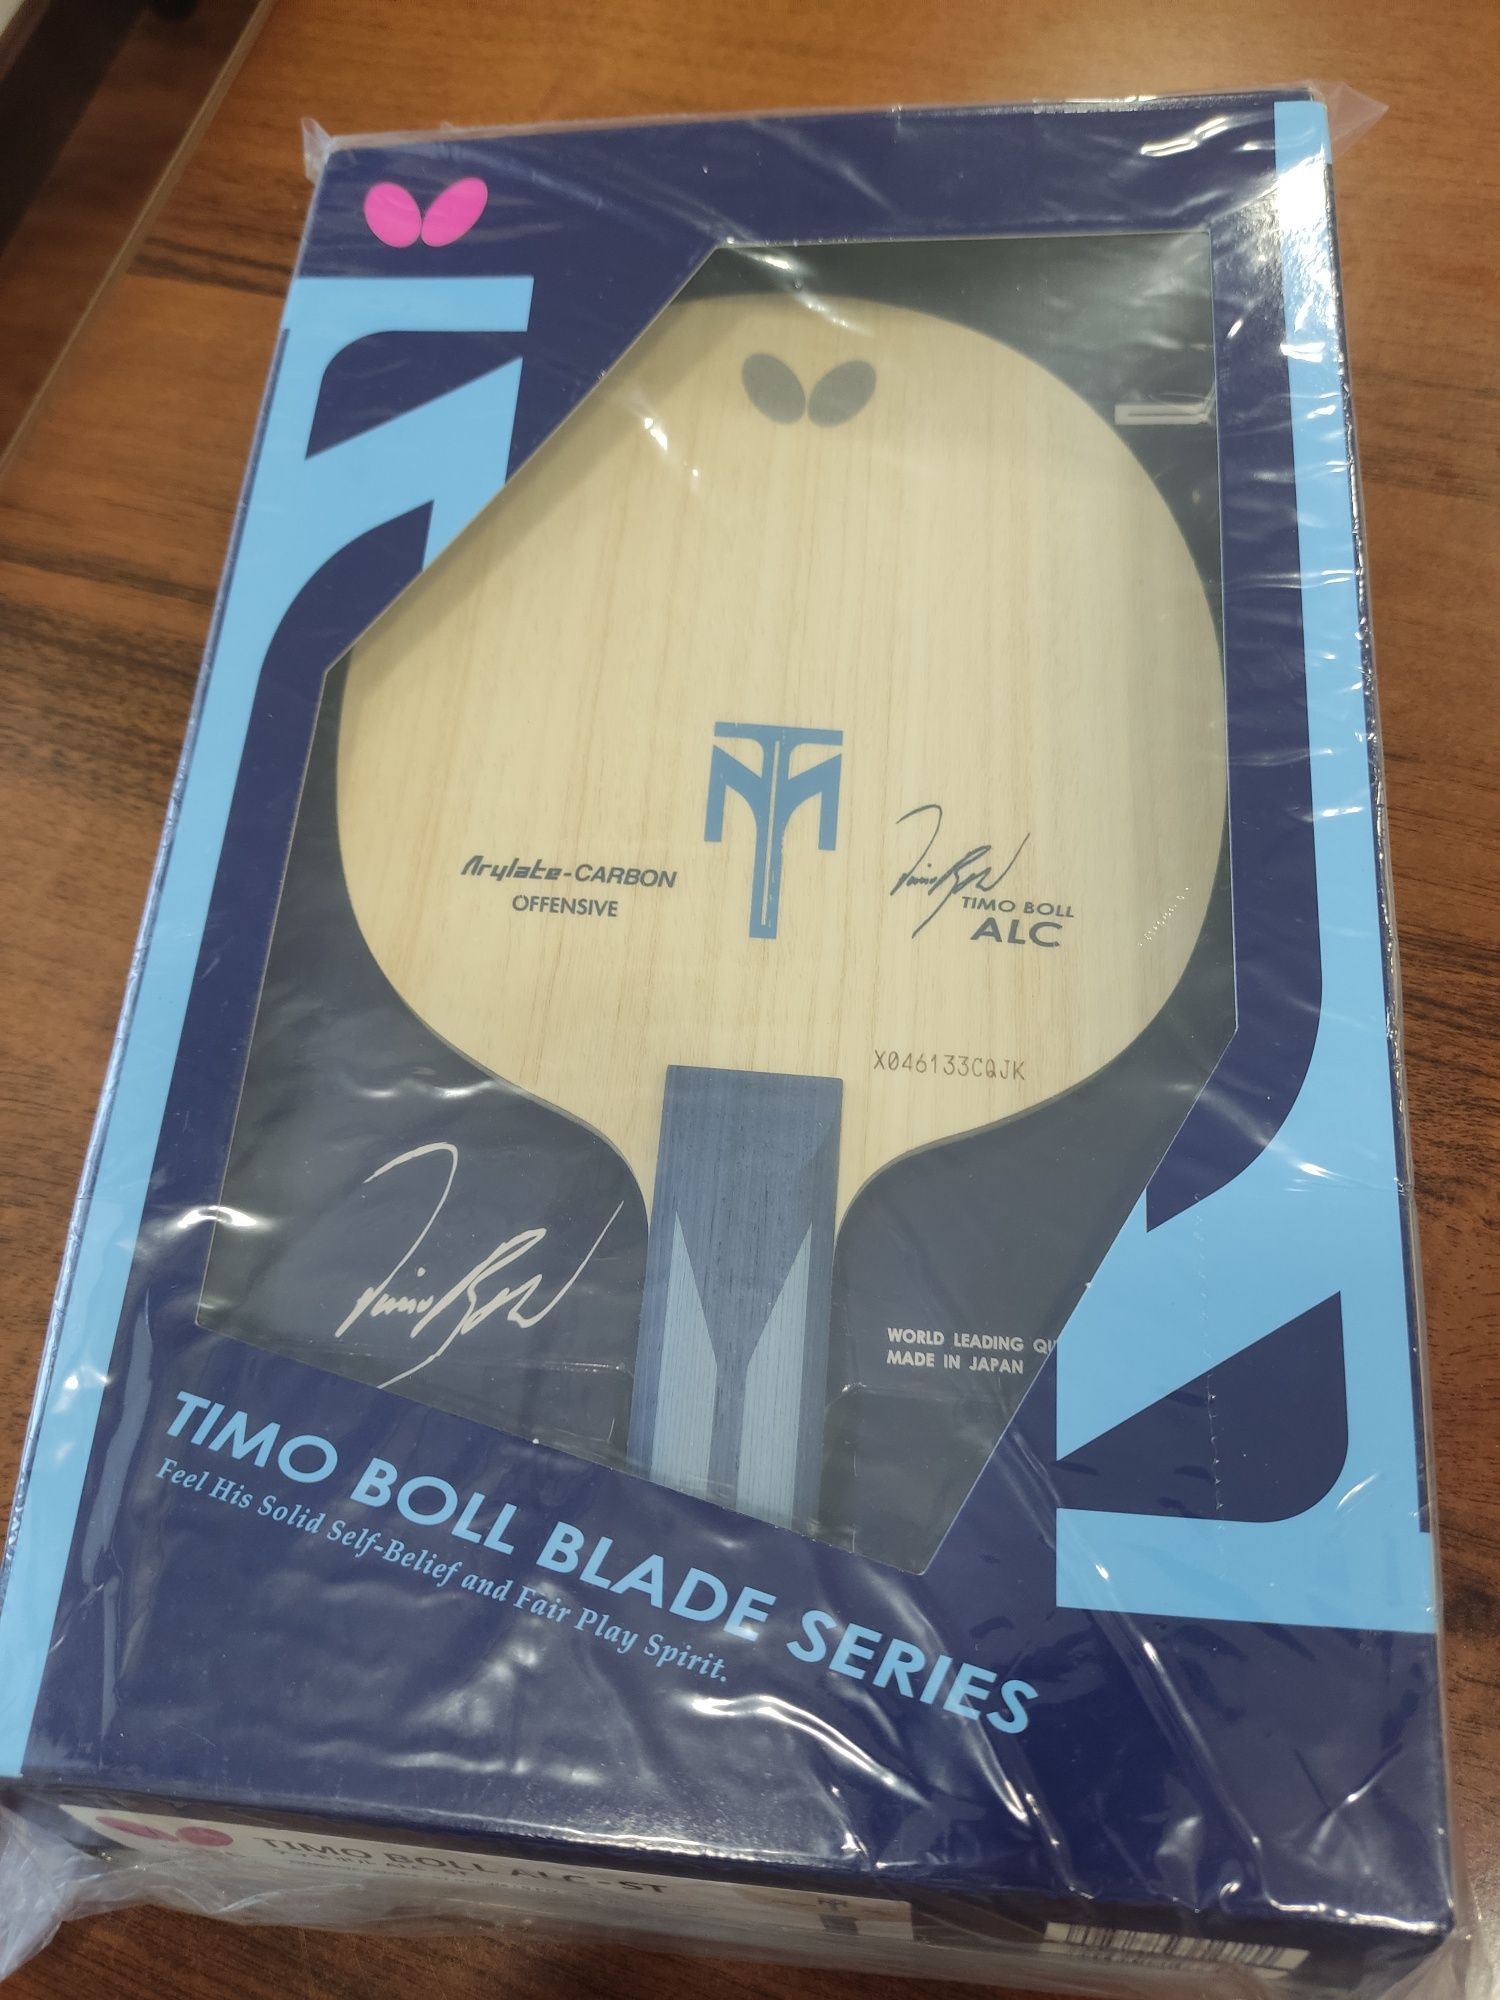 Timo Boll ALC made in Japan